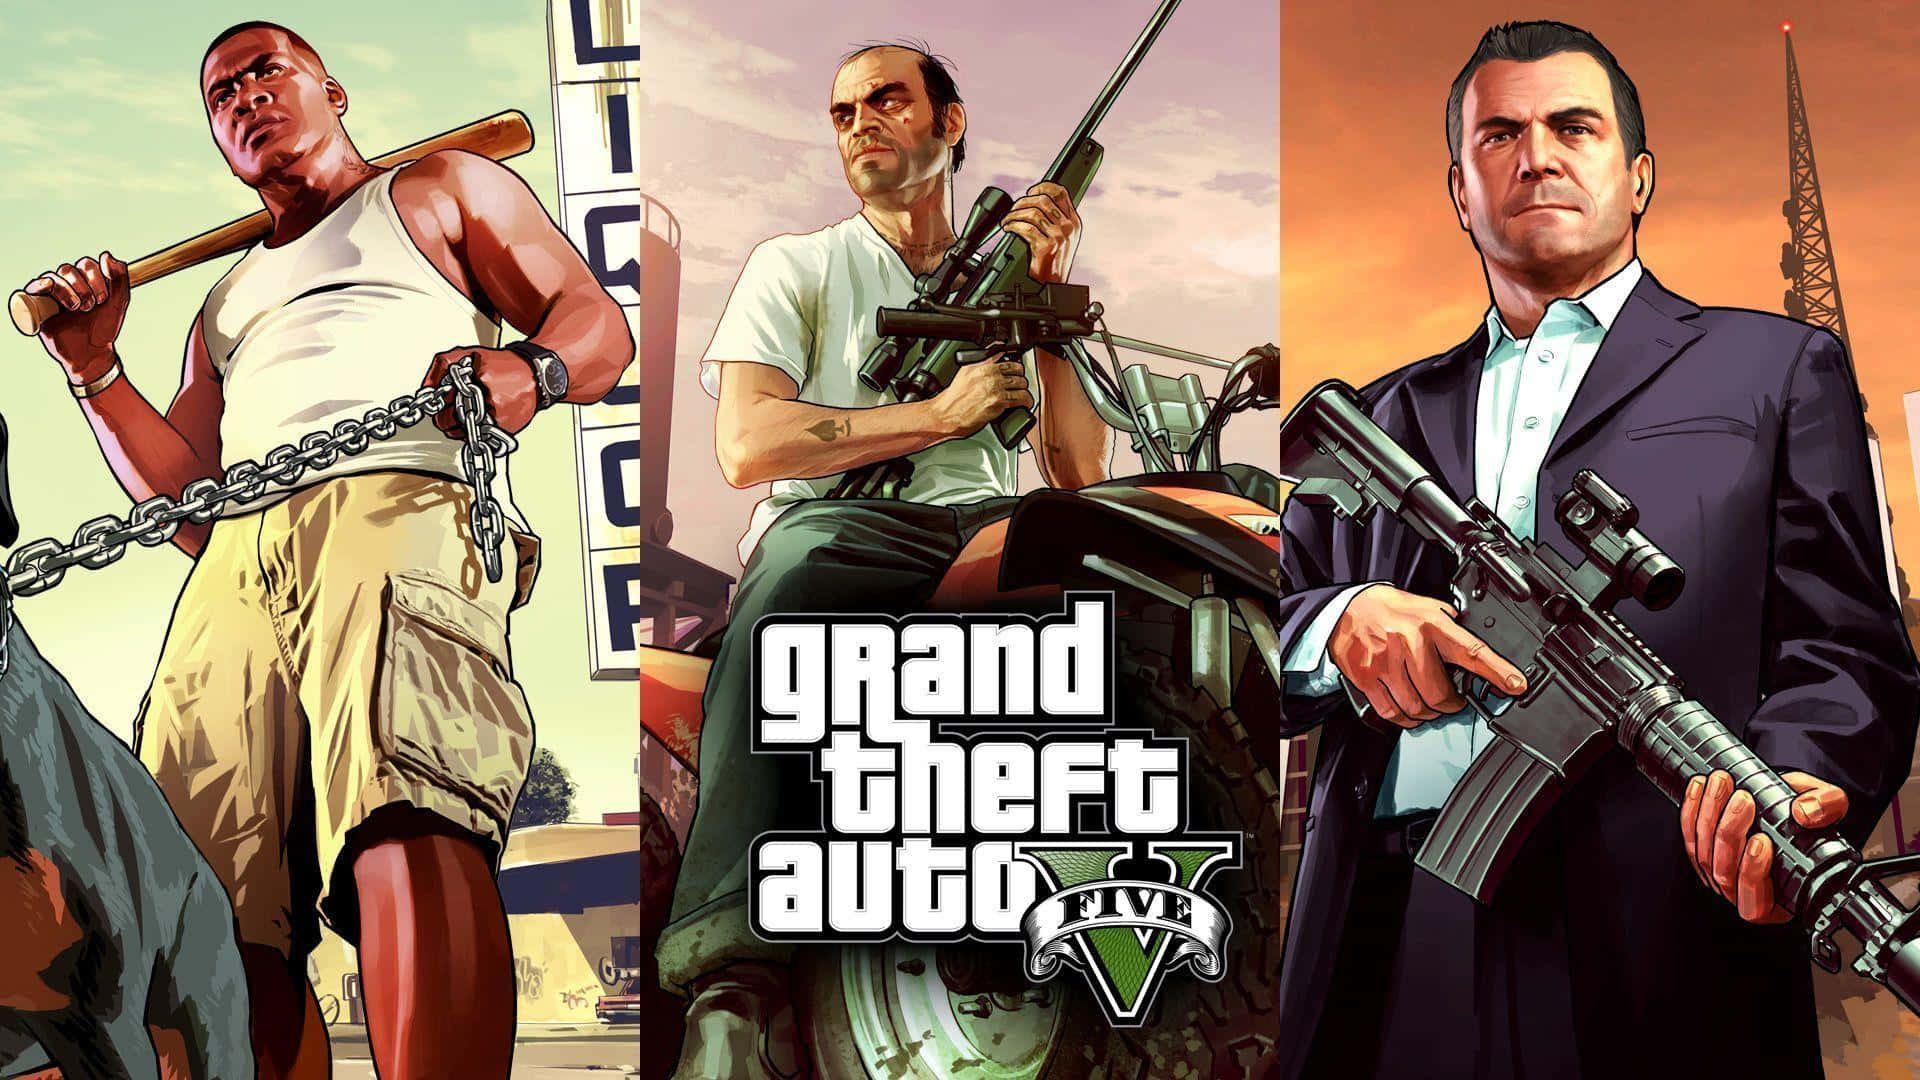 Explore the expansive world of GTA 5